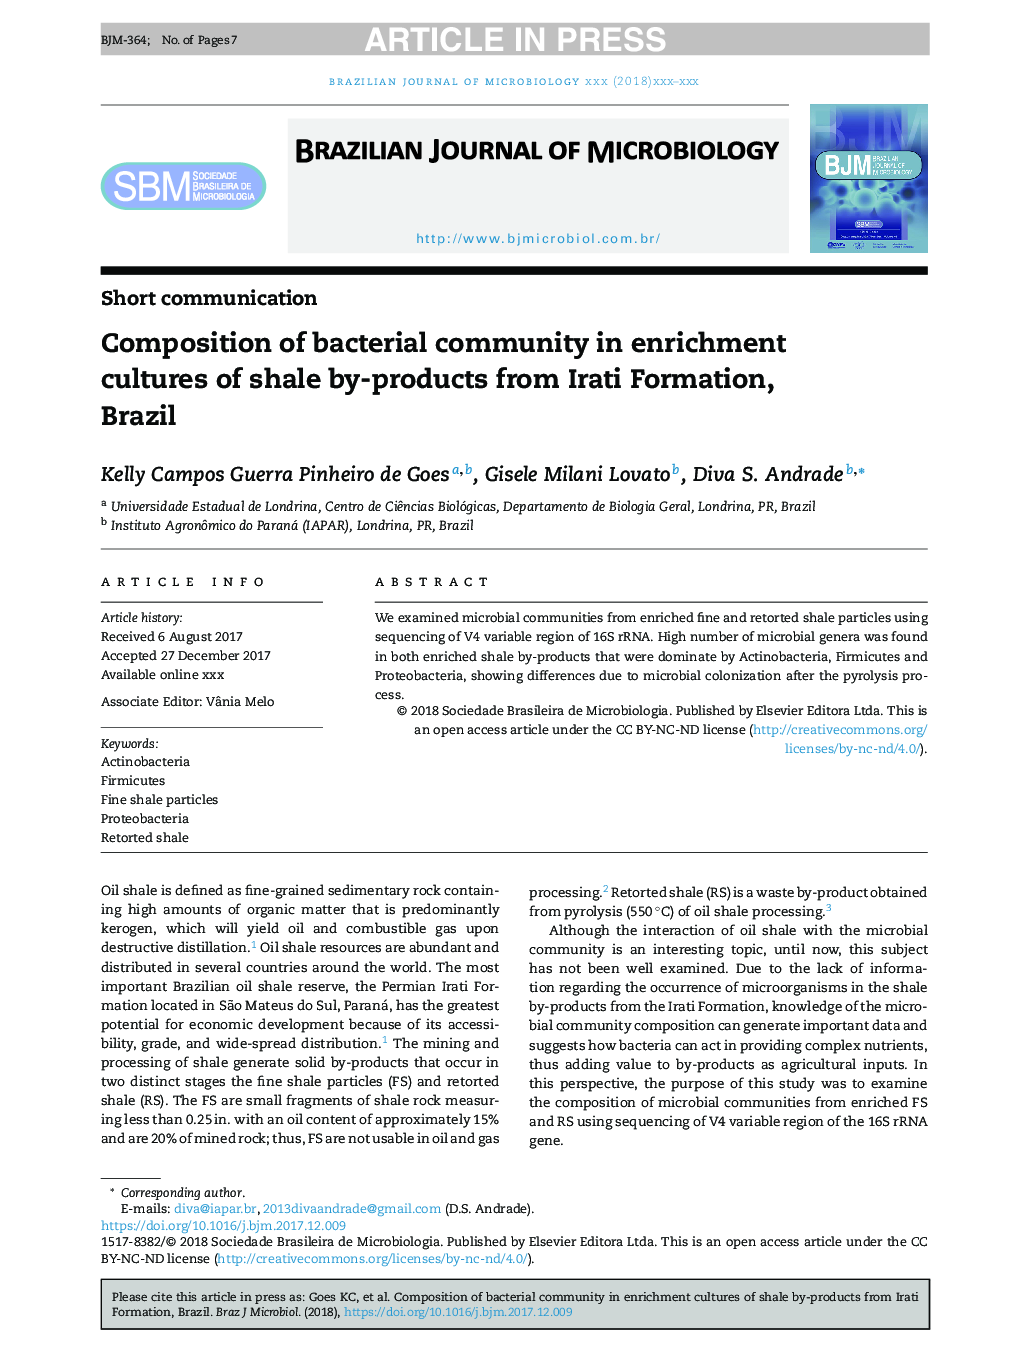 Composition of bacterial community in enrichment cultures of shale by-products from Irati Formation, Brazil